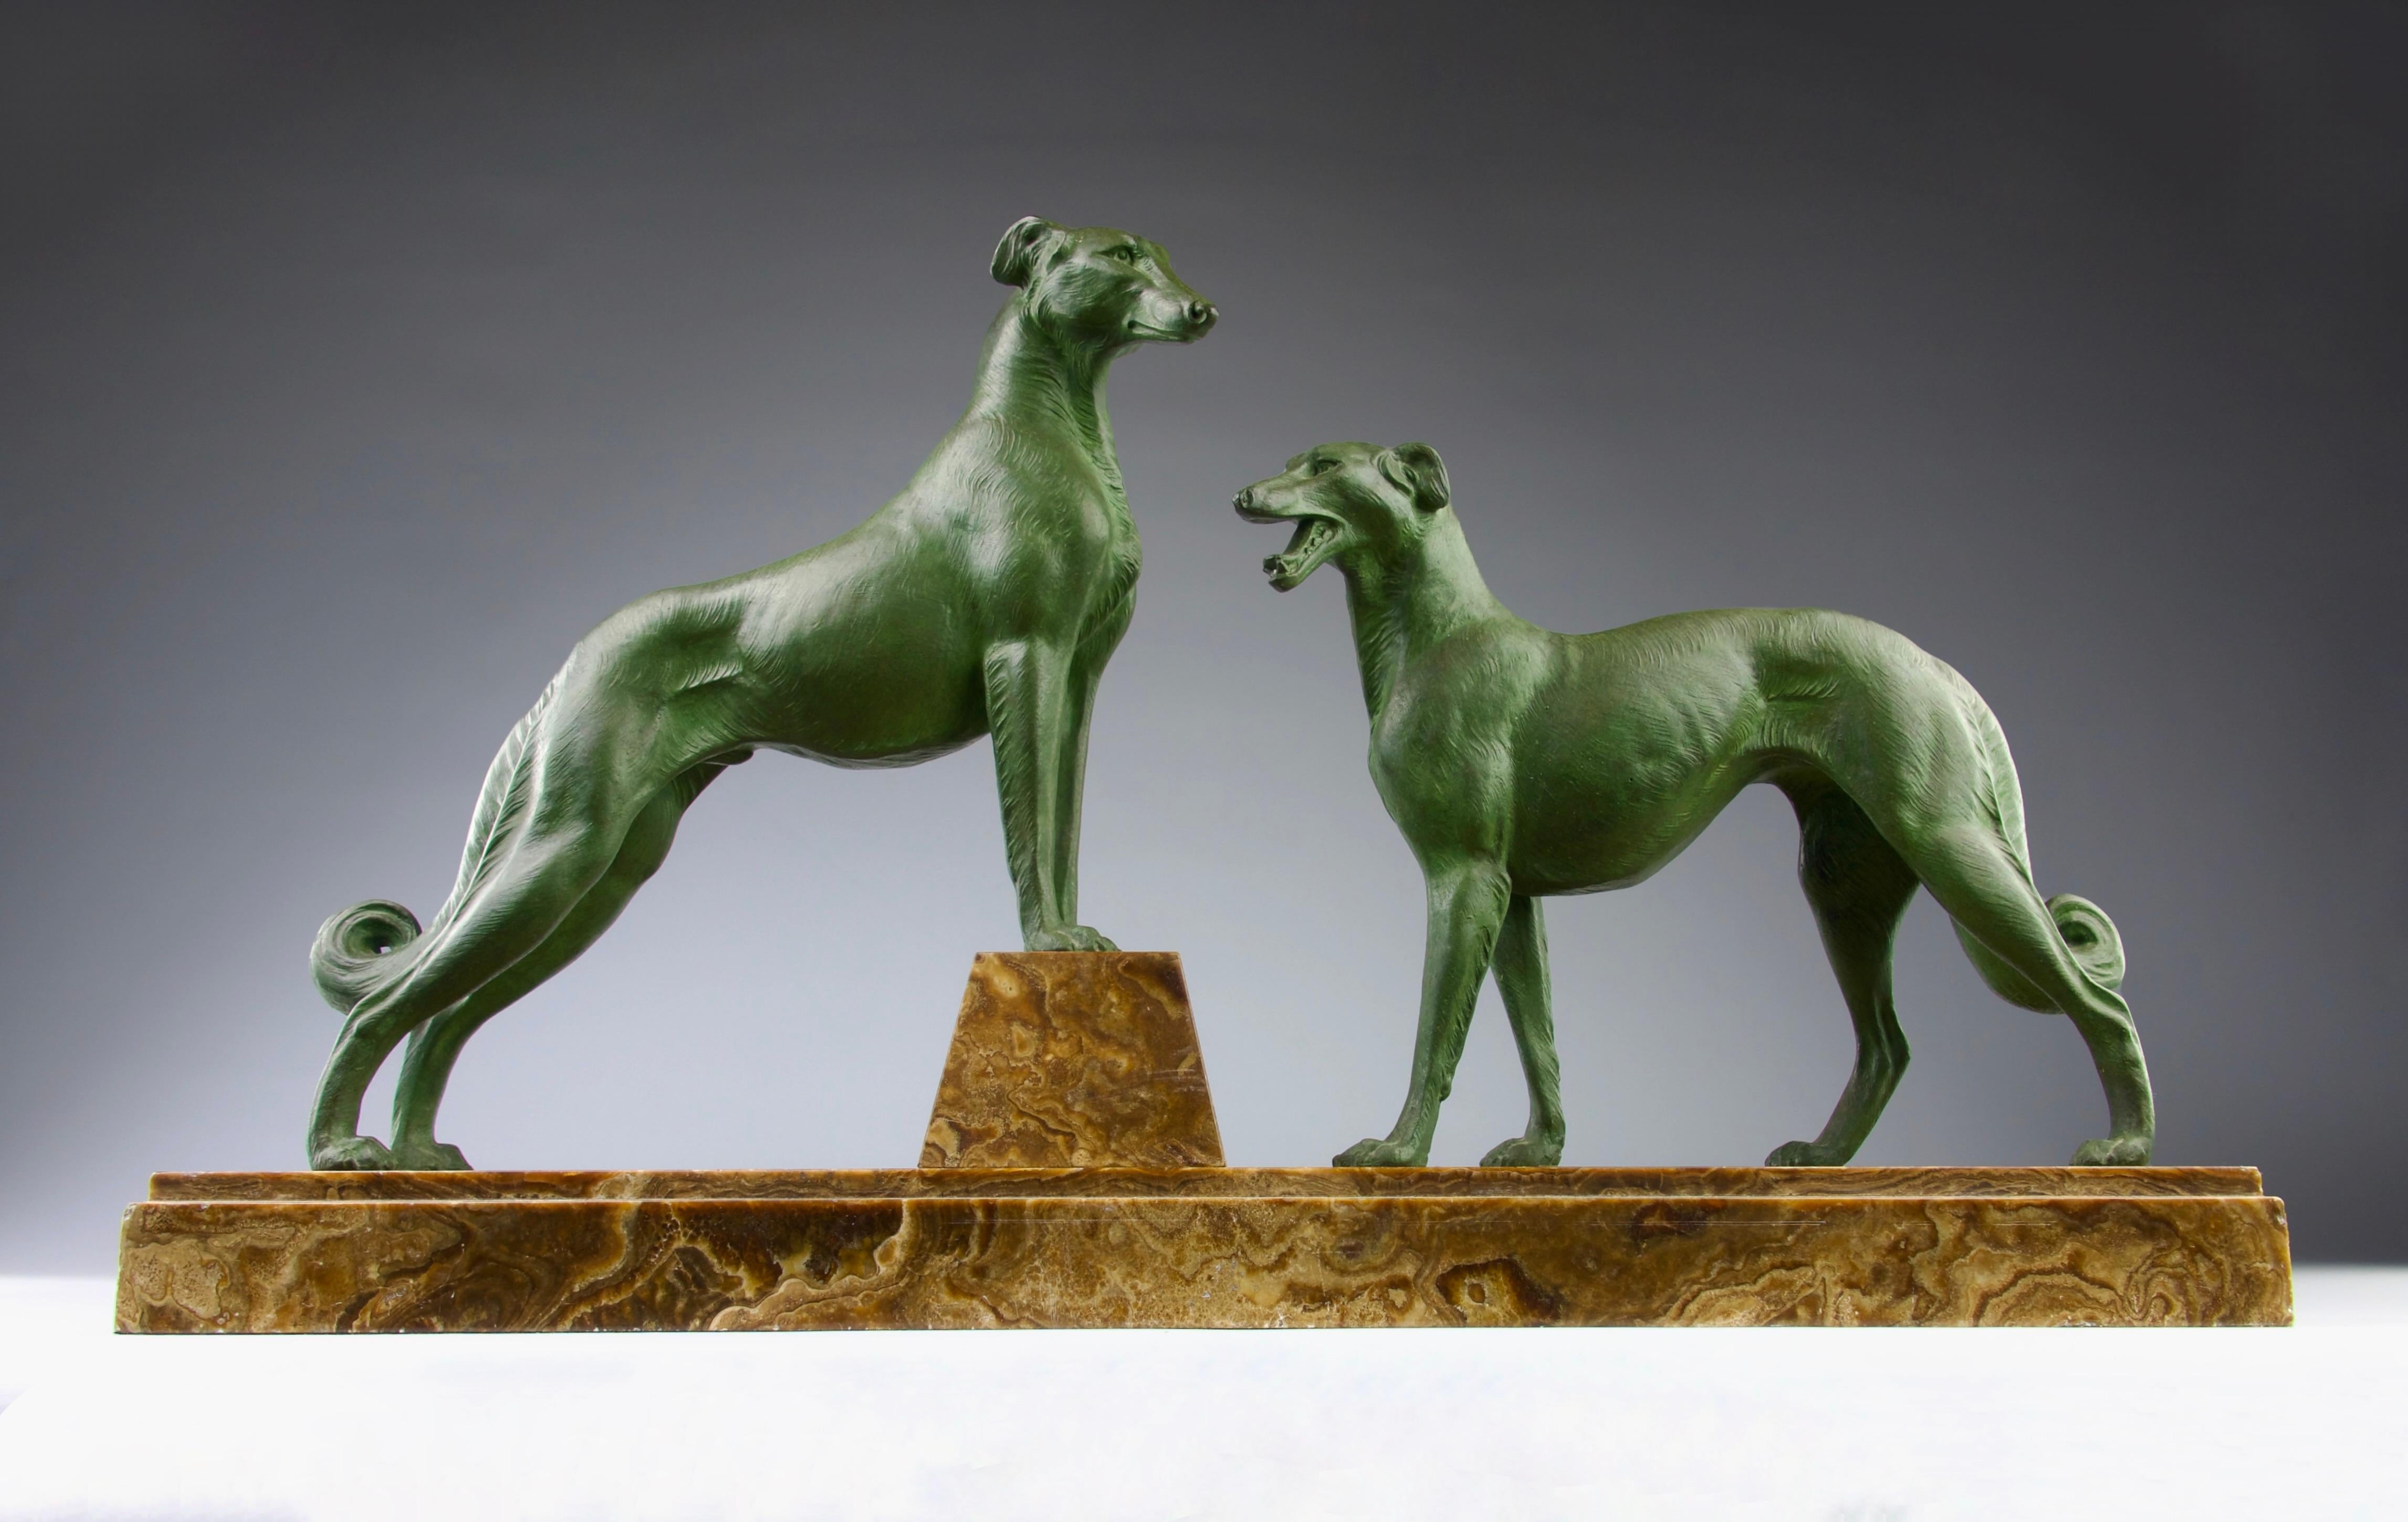 Superb and large sculpture of two alert greyhound dogs in beautiful Art Deco period green patina. Set on an elegant brown and white veined marble base.

Dimensions in cm ( H x L x l ) : 66 x 38 x 14

Secure shipping with specialised company.